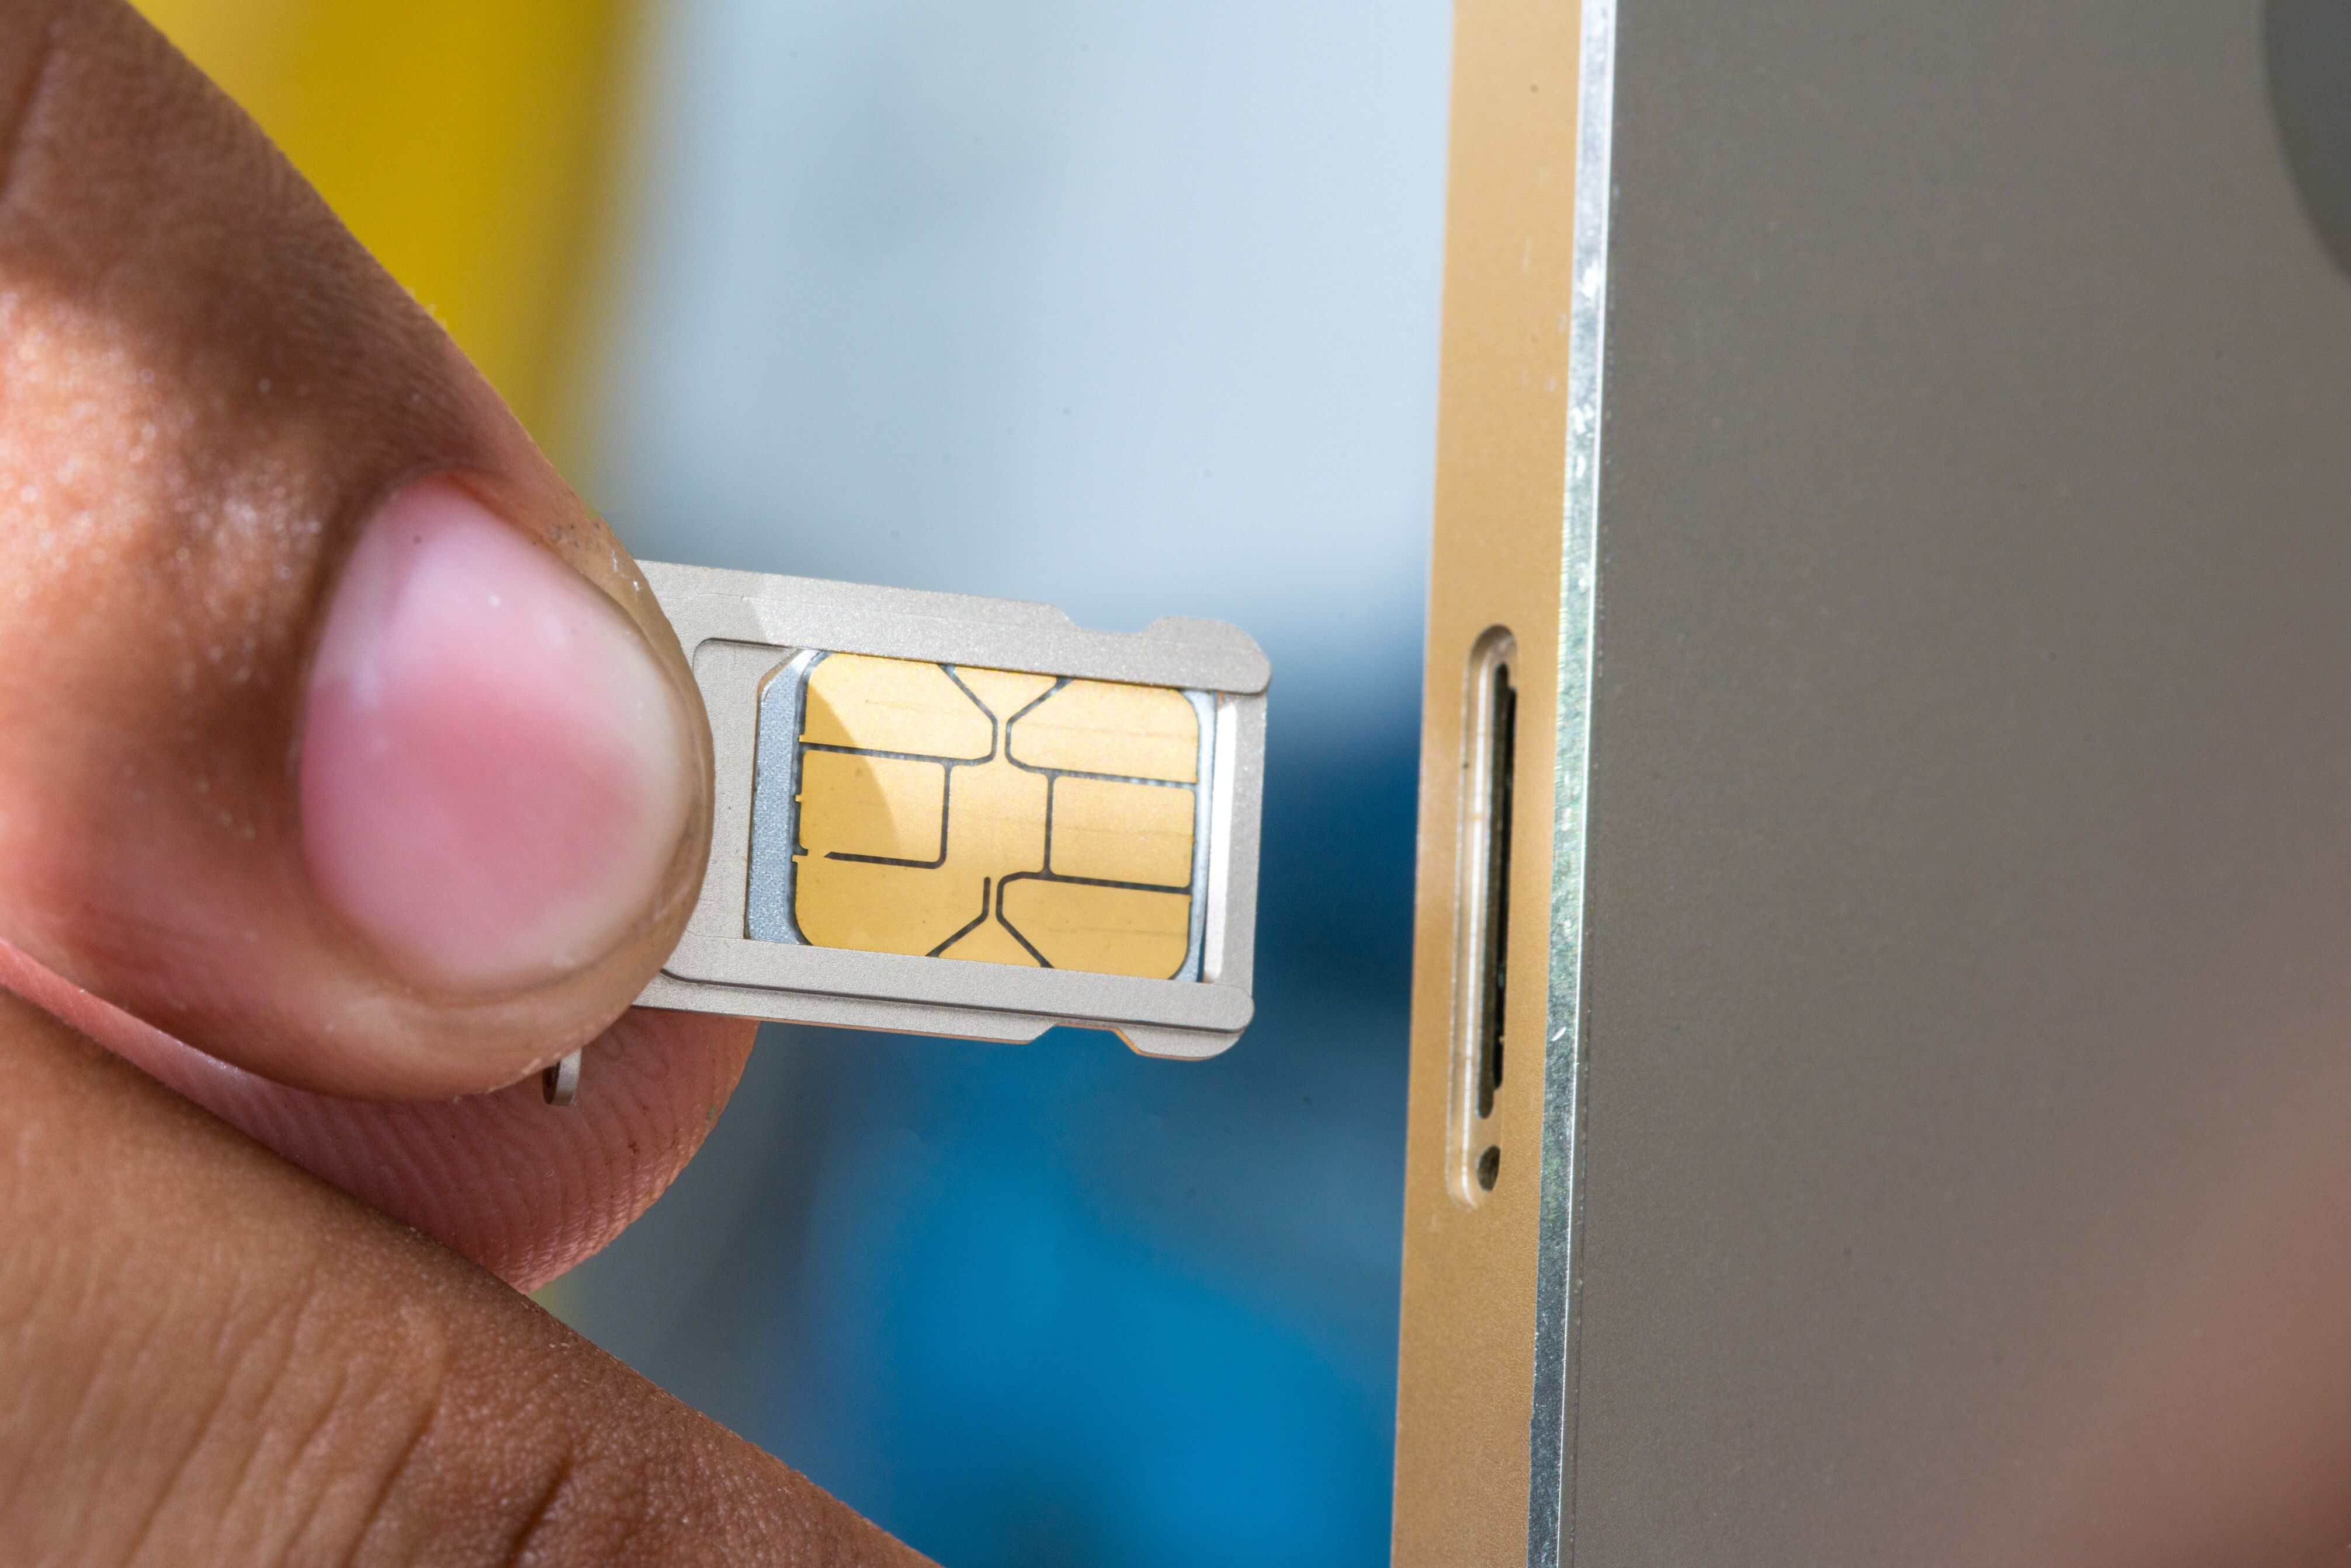 before-changing-sim-card-important-precautions